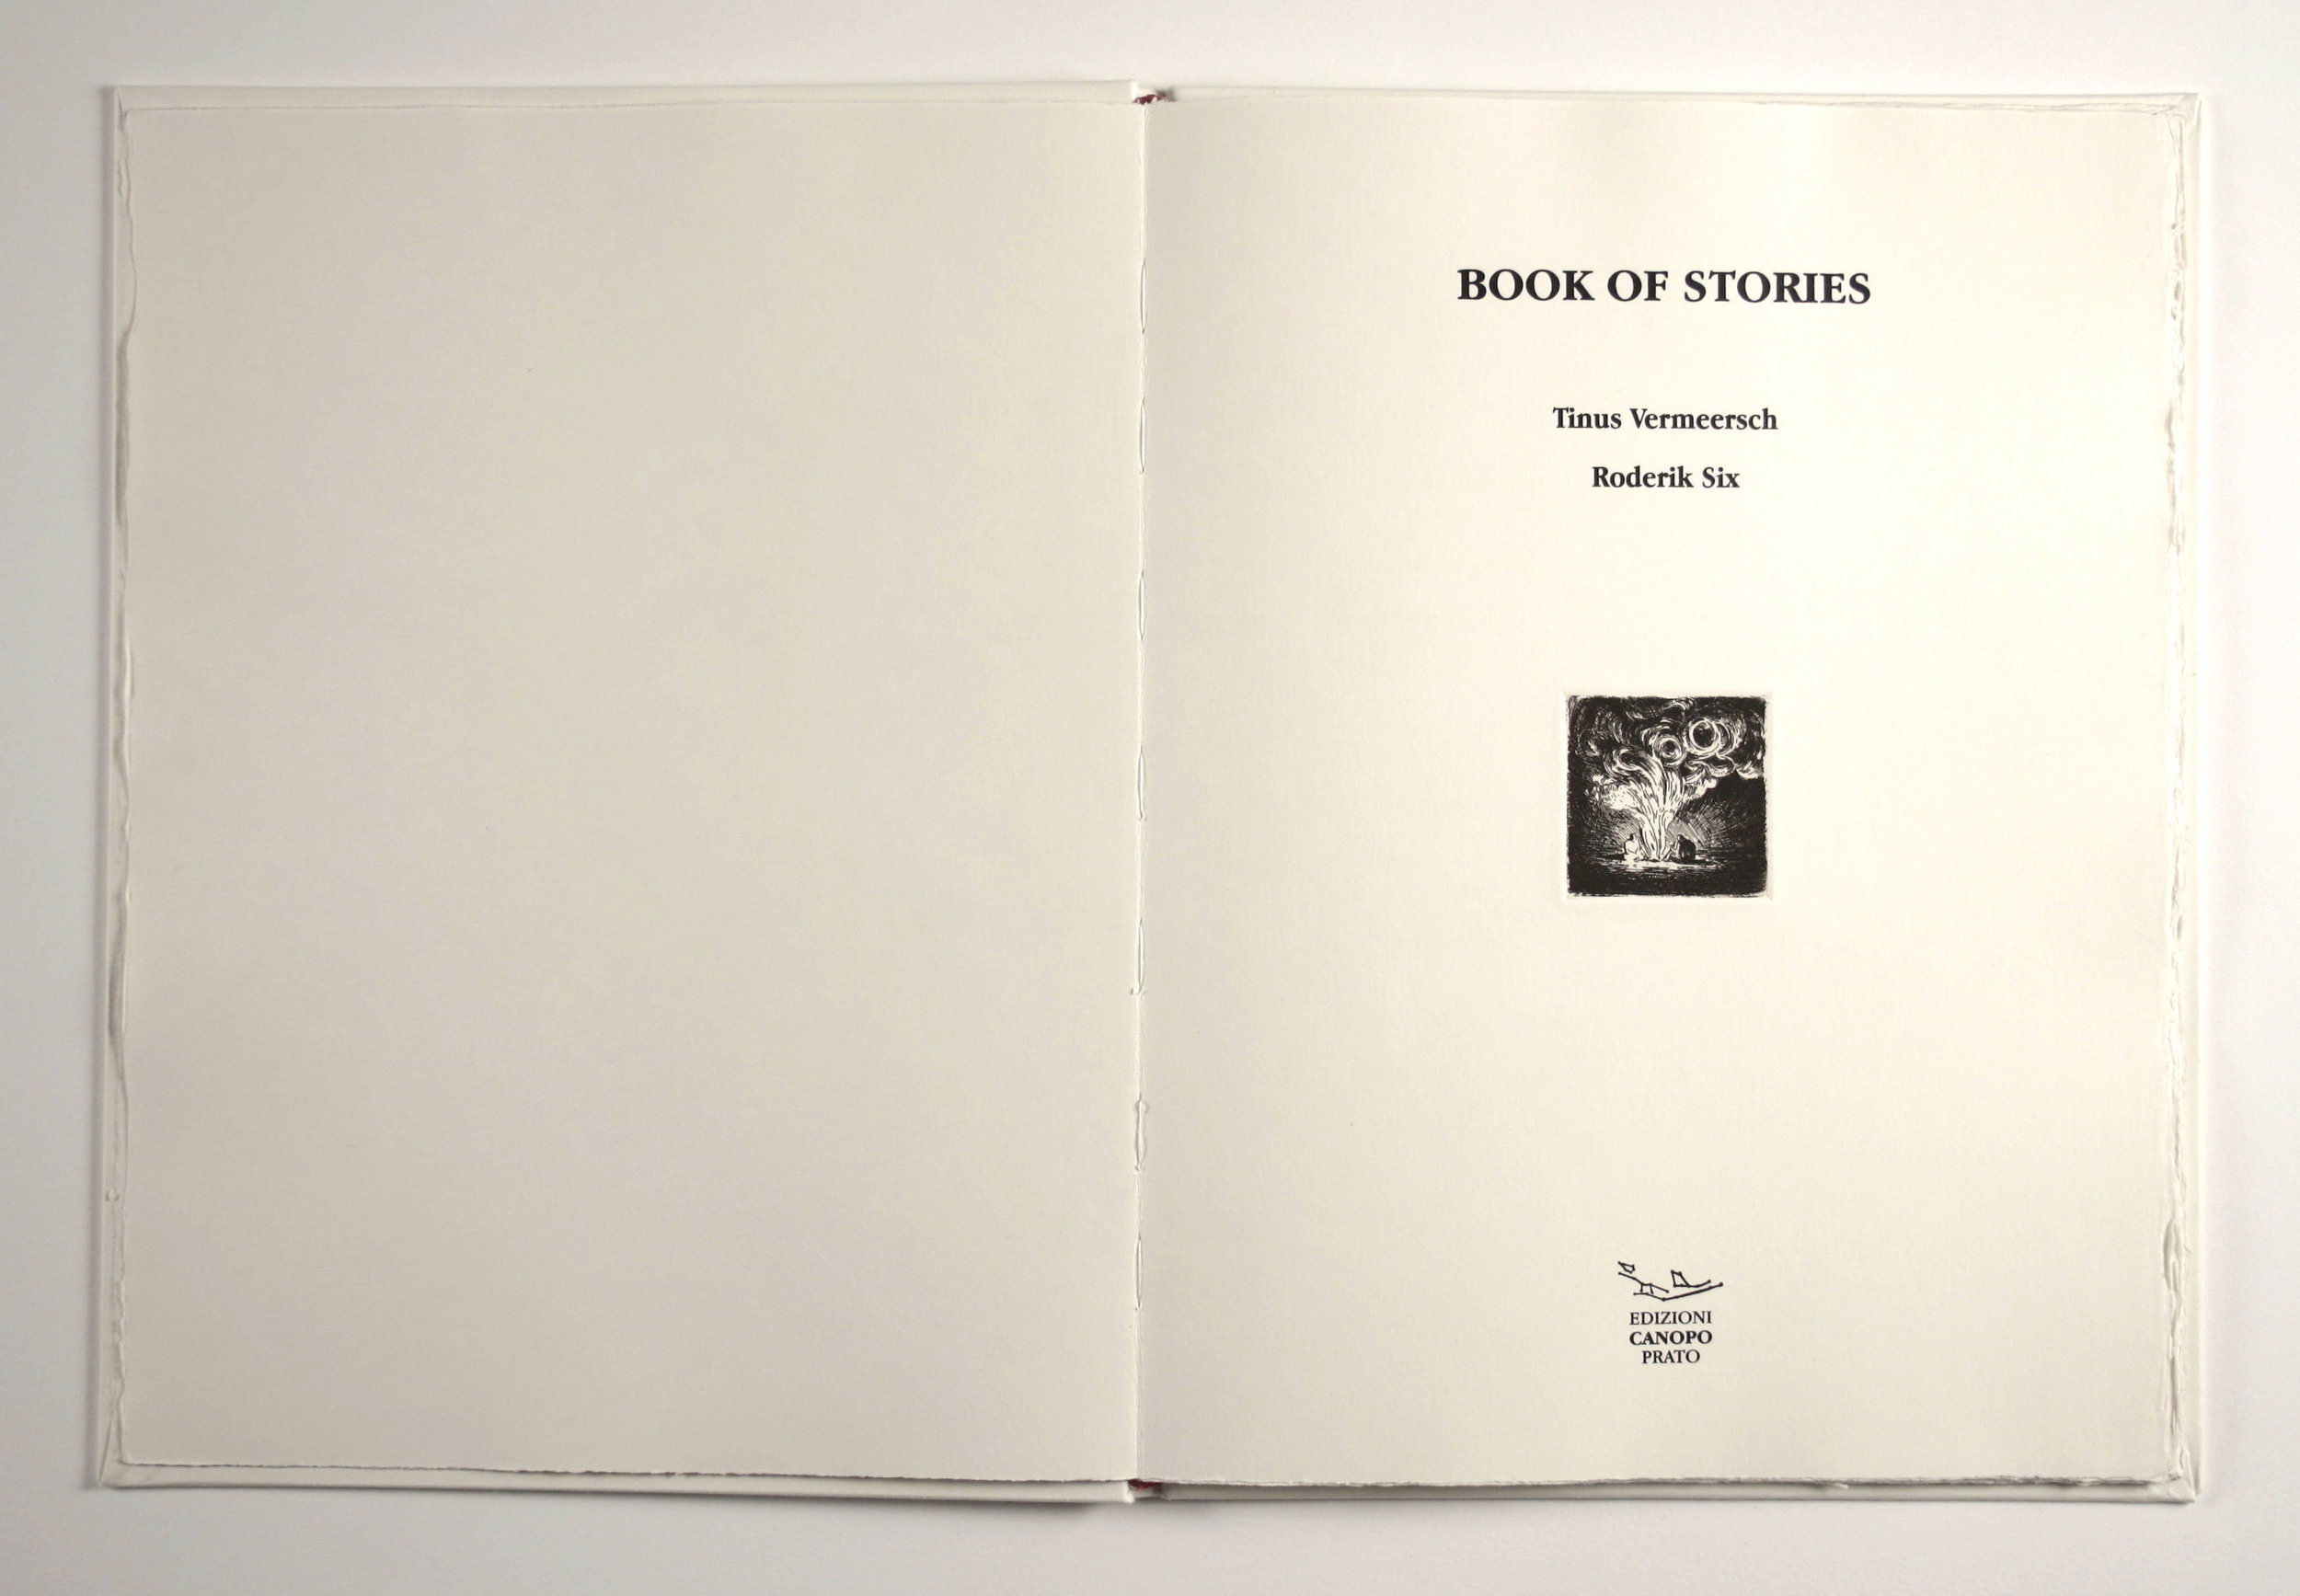   BOOK OF STORIES Eleven etchings of TINUS VERMEERSCH One unpublished narration of RODERIK SIX , 2013 Artist Book 16 x 11 x 1/2 inches (40.6 x 27.9 x 1.3 cm) Wood case: 17 1/8 x 11 3/4 x 1 1/2 inches (43.5 x 29.8 x 3.8 cm) Edition : 43/50 Edizioni Ca